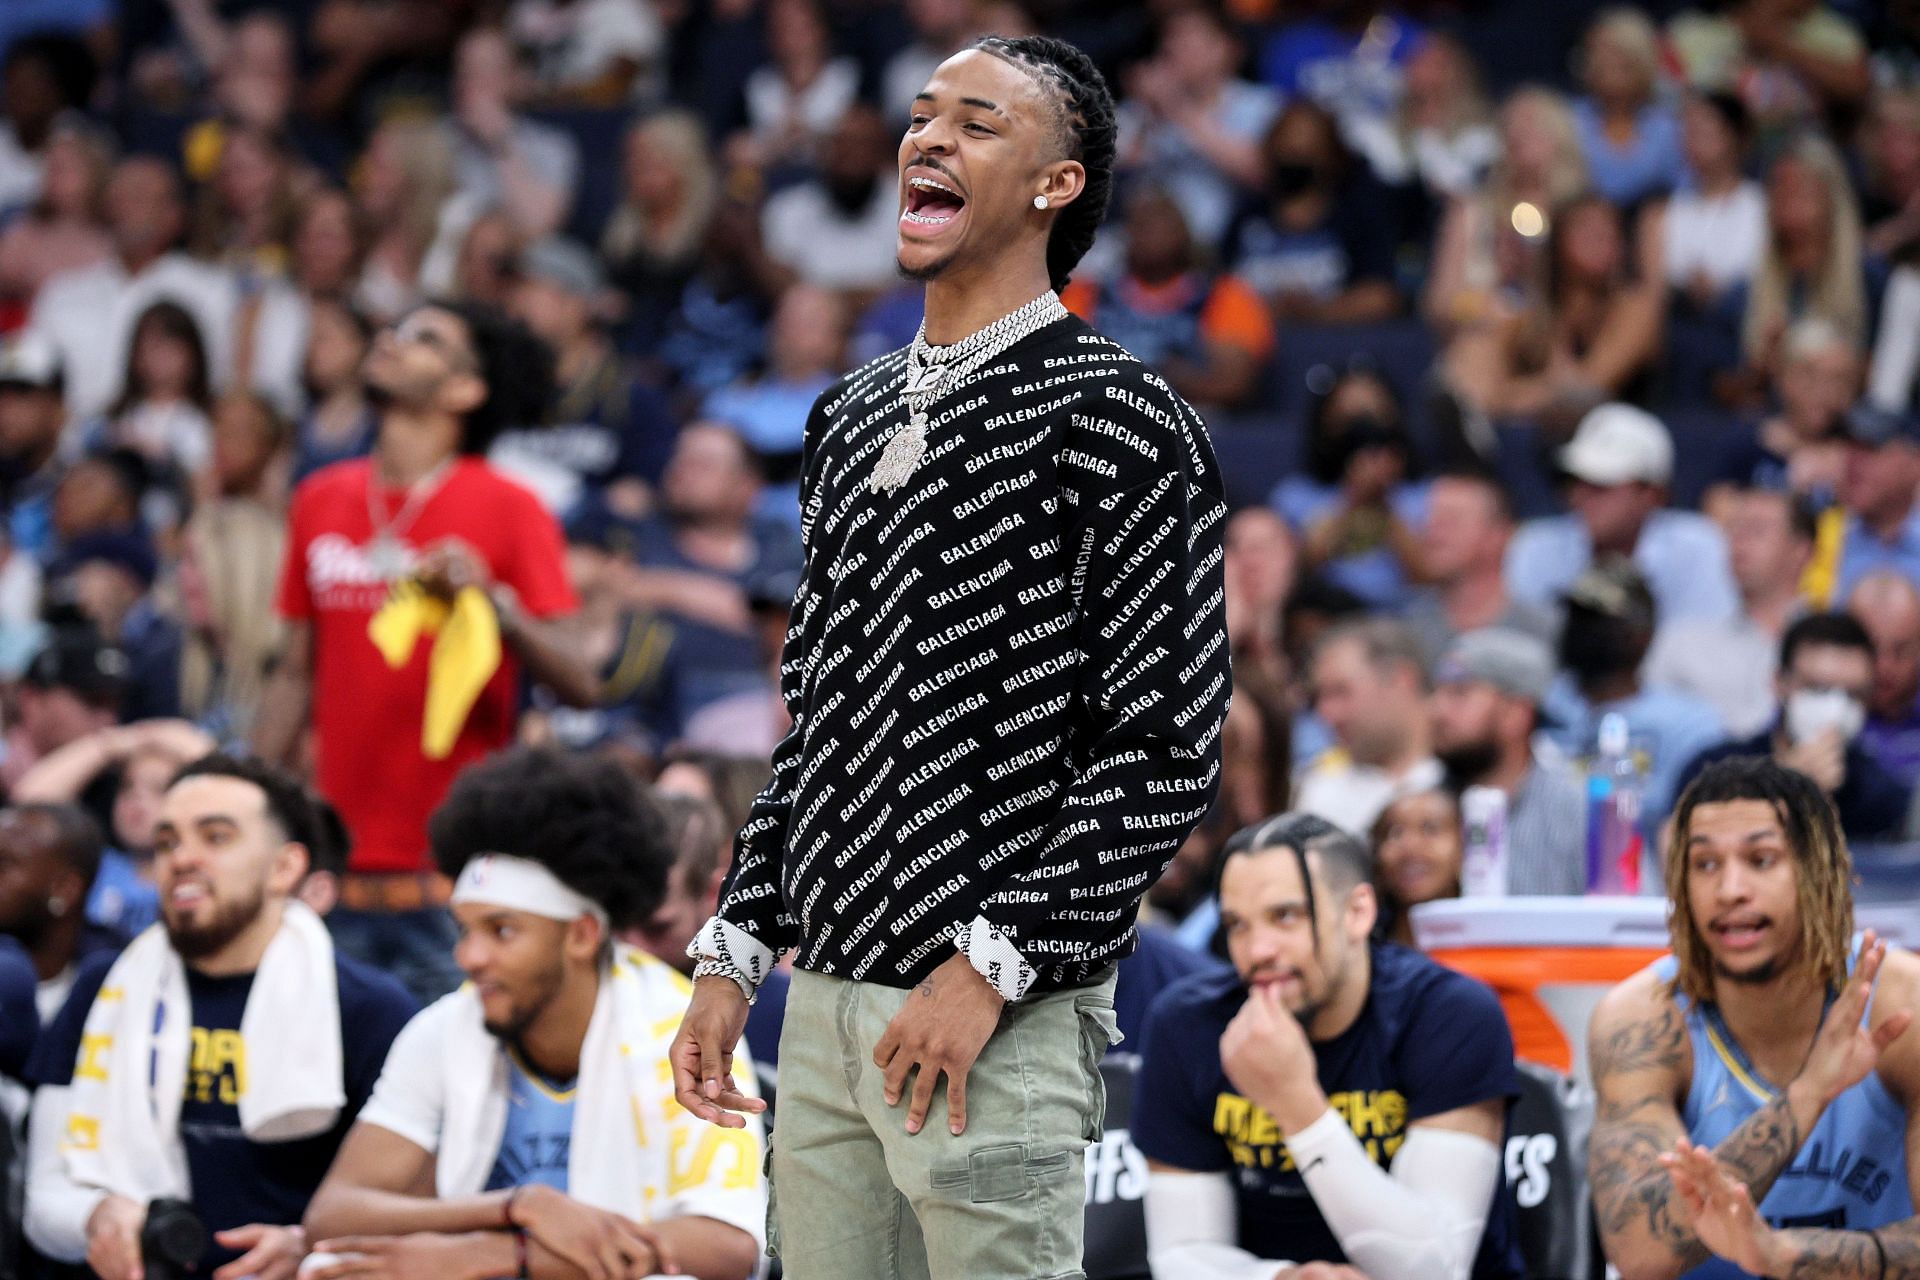 Ja Morant of the Memphis Grizzlies reacts from the bench during the Western Conference semifinals.